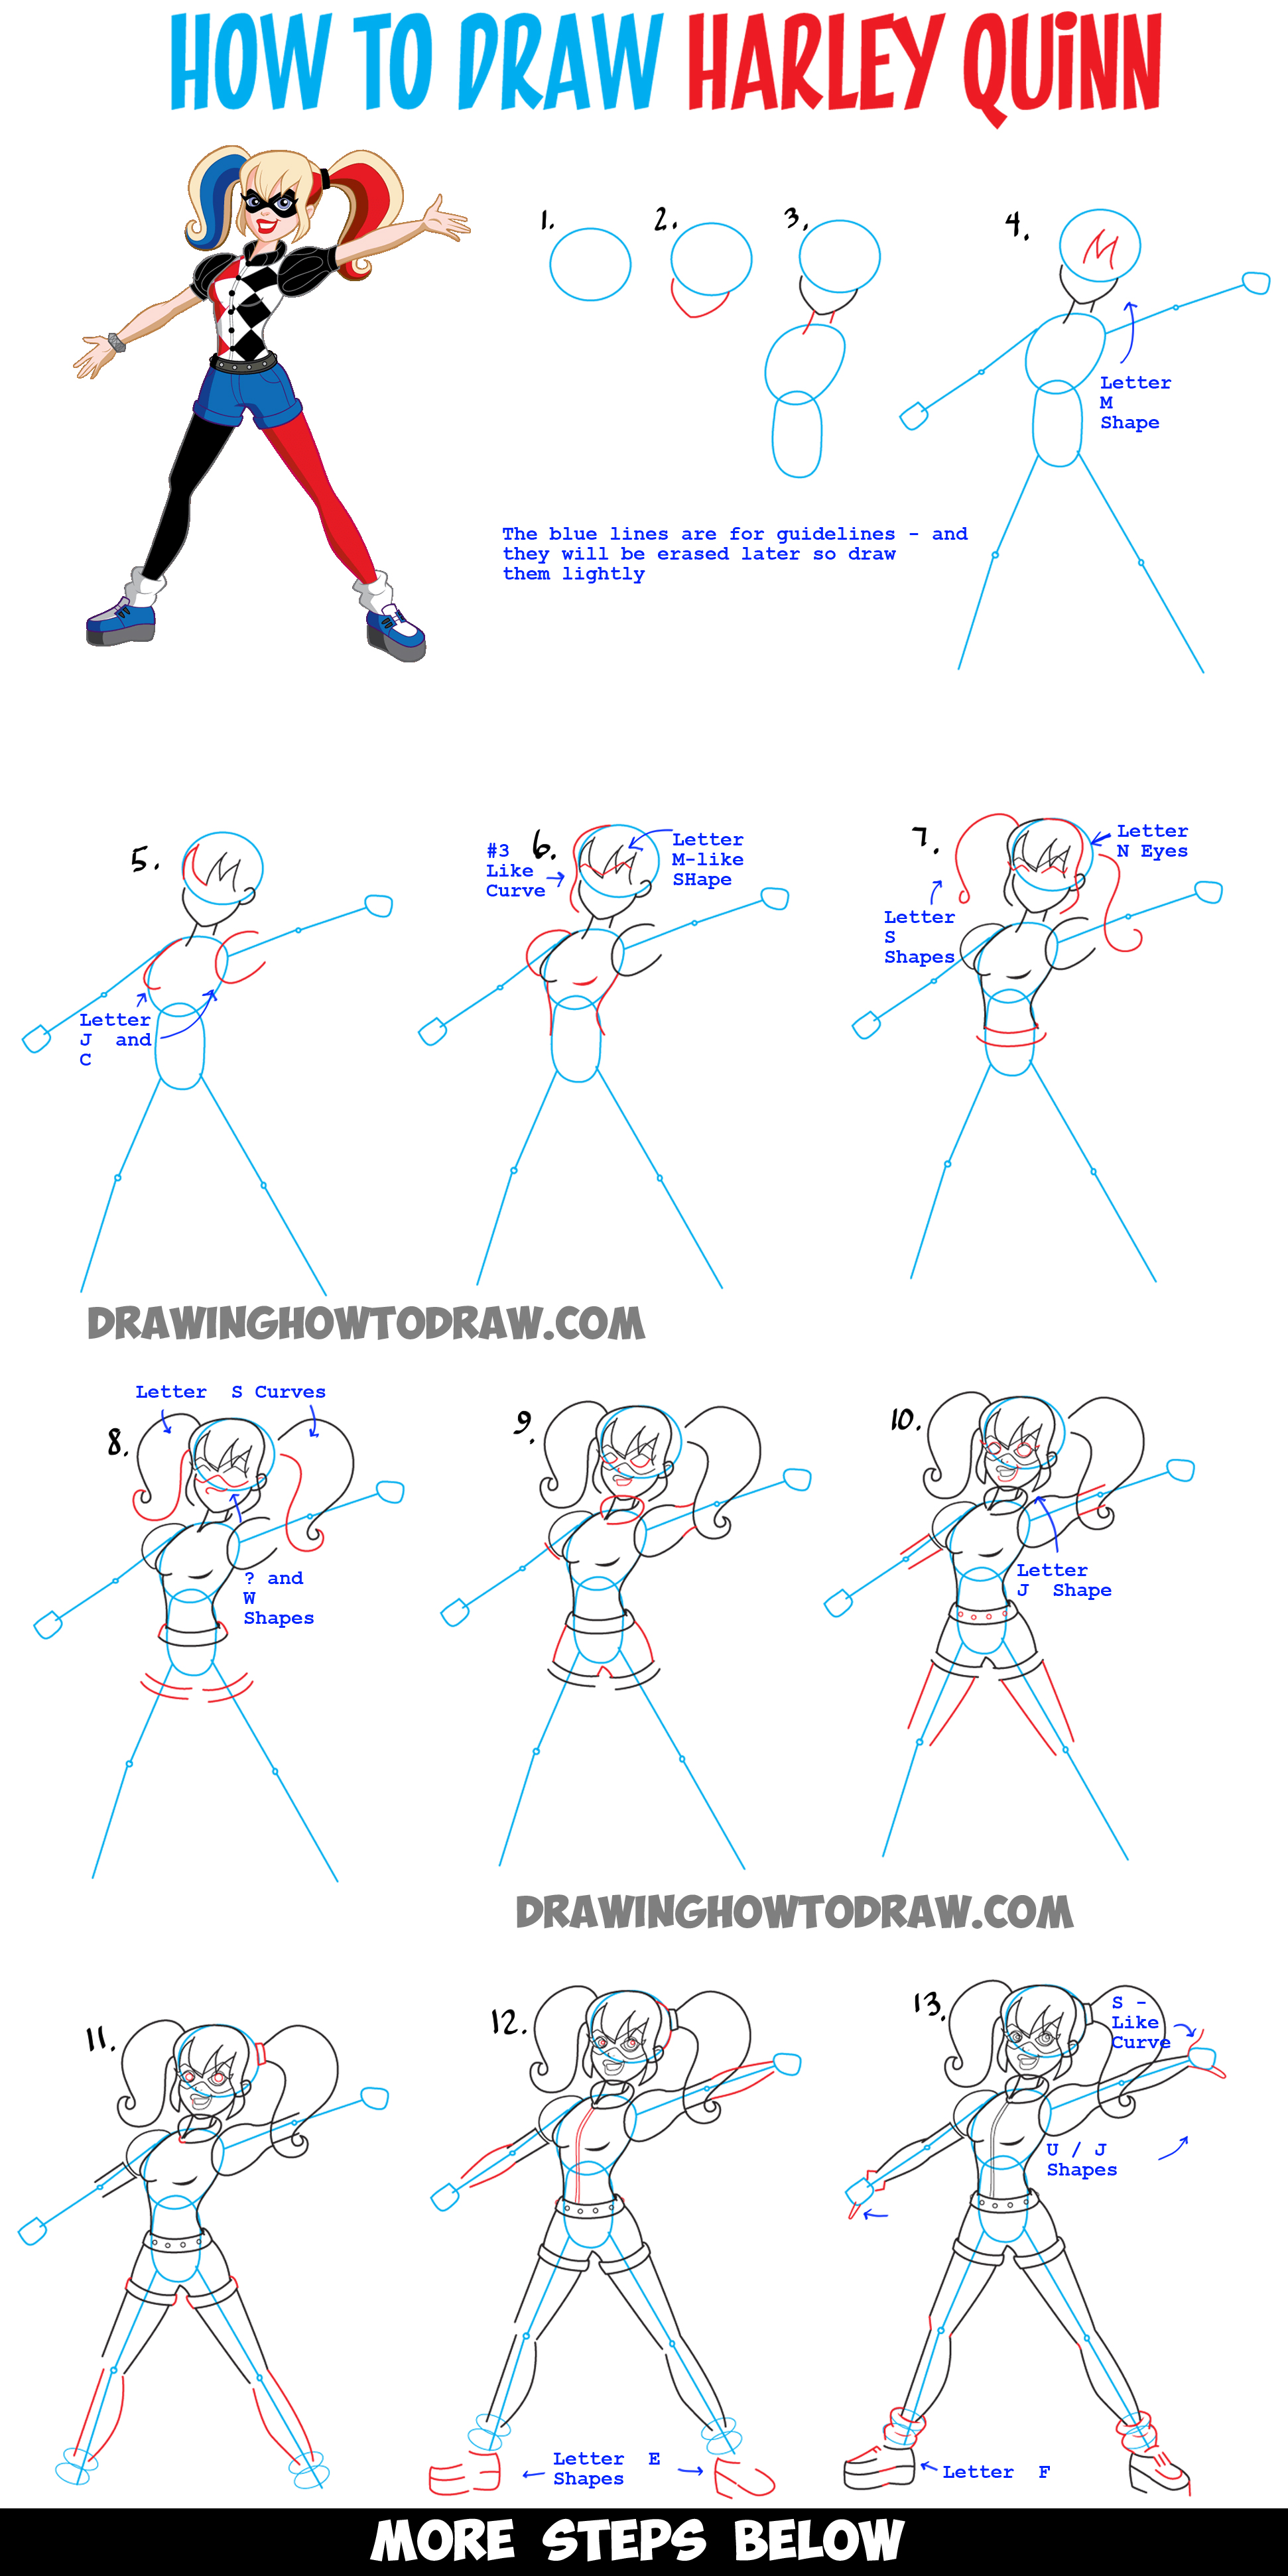 How to Draw Harley Quinn from DC Suicide Squad - Easy Step by Step Drawing Tutorial